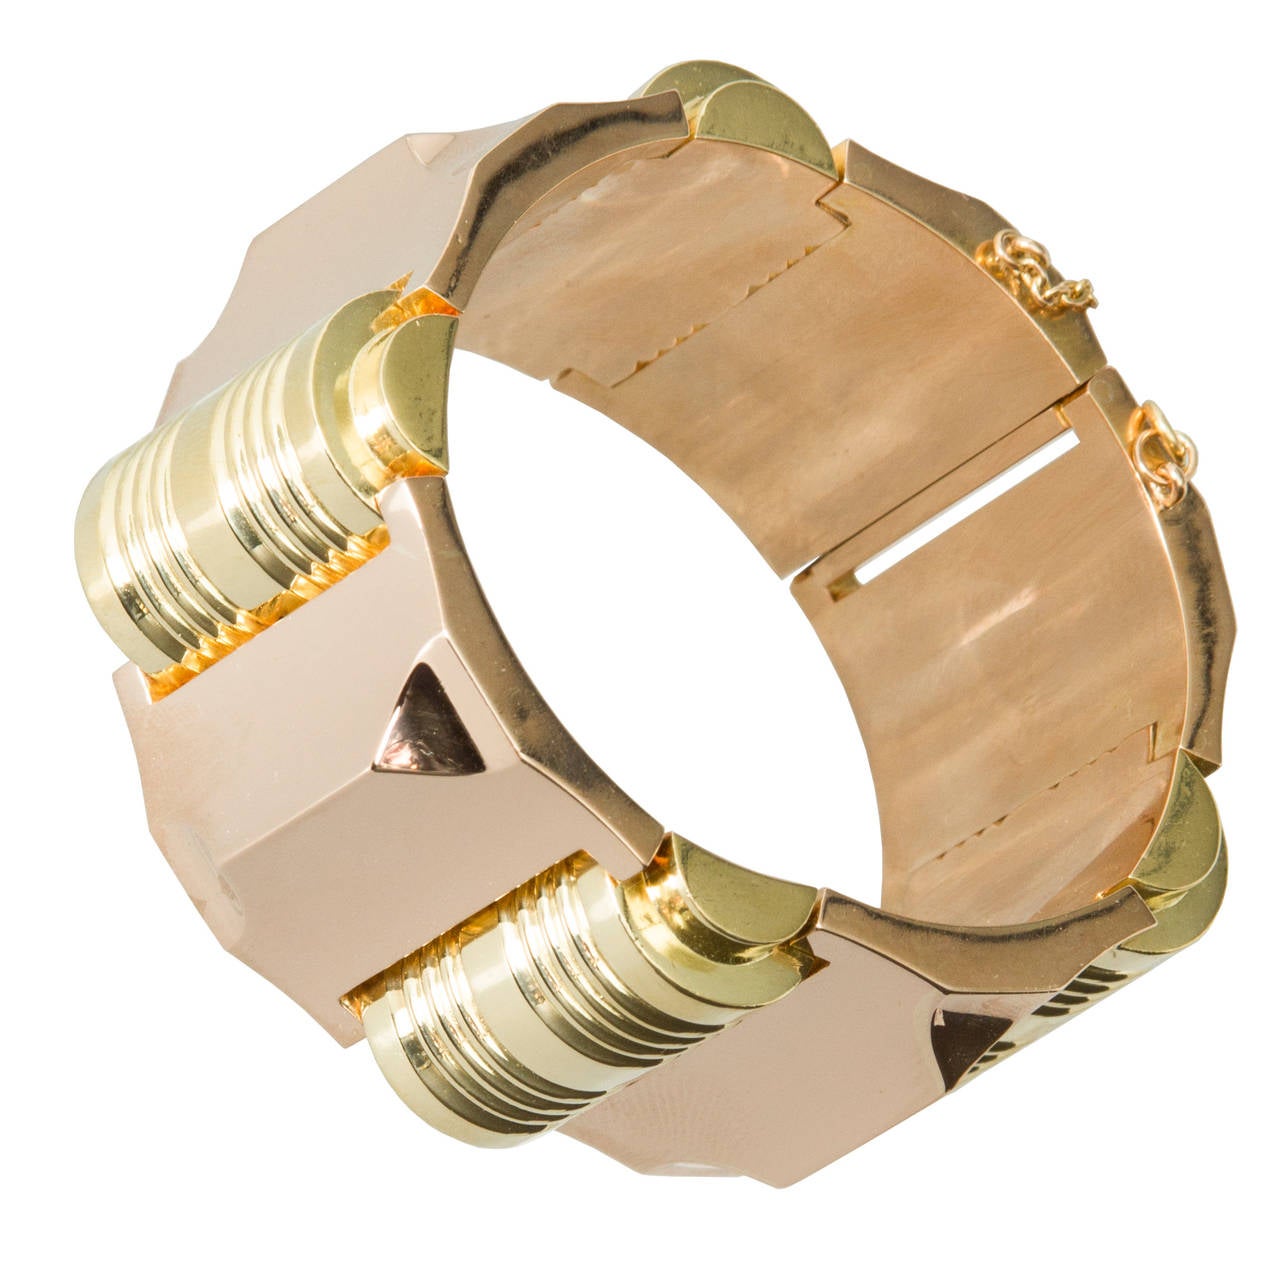 This is a fabulous machine age bracelet.  It has an interior circumference of 7 inches